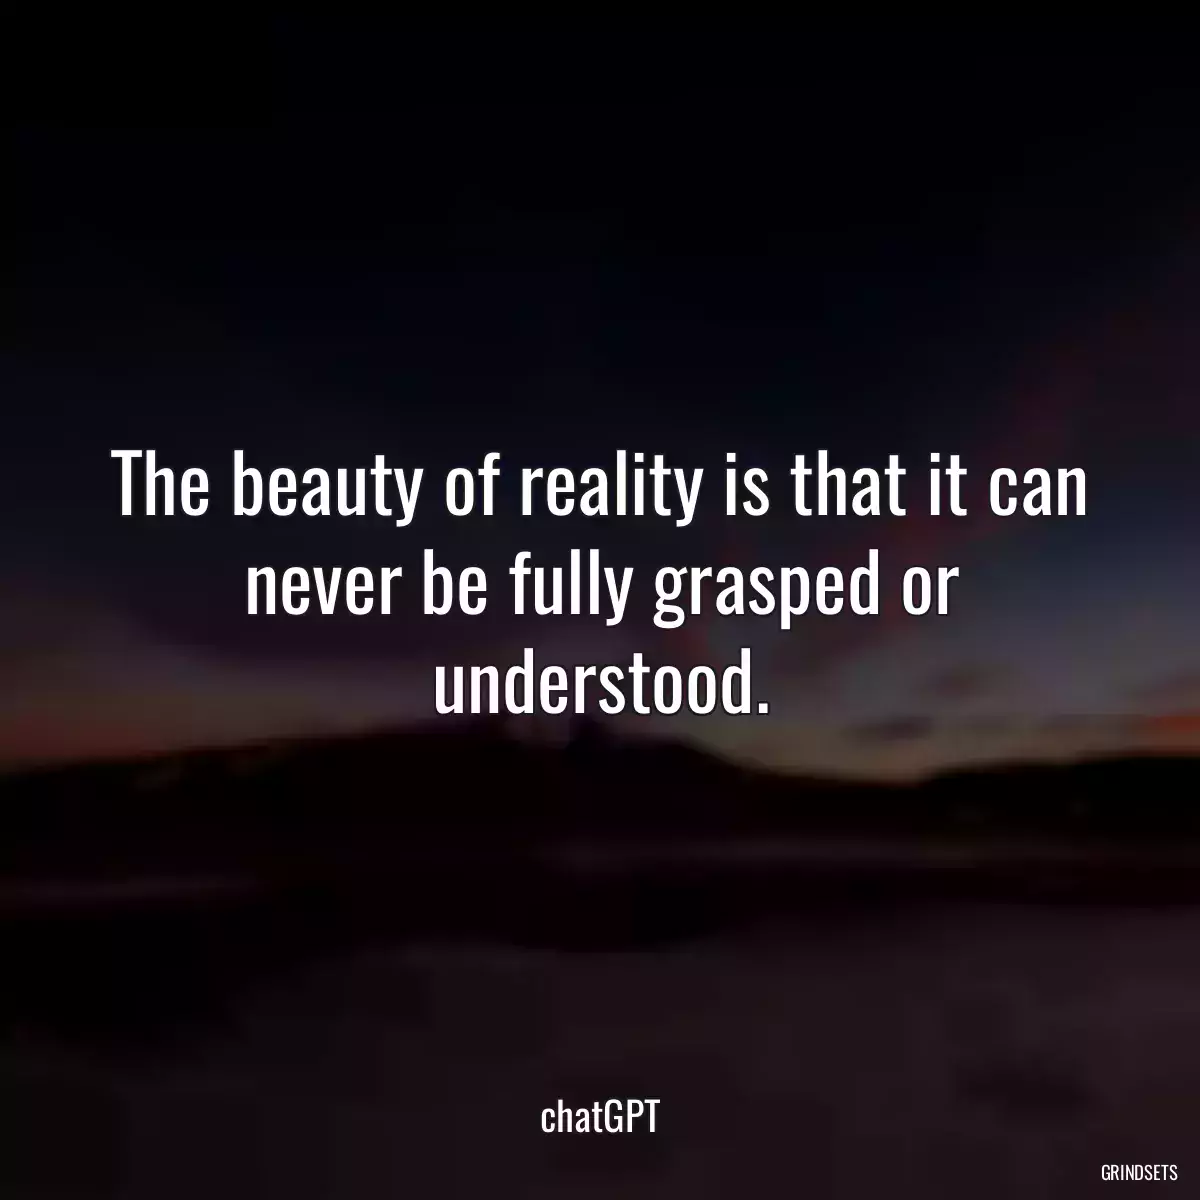 The beauty of reality is that it can never be fully grasped or understood.